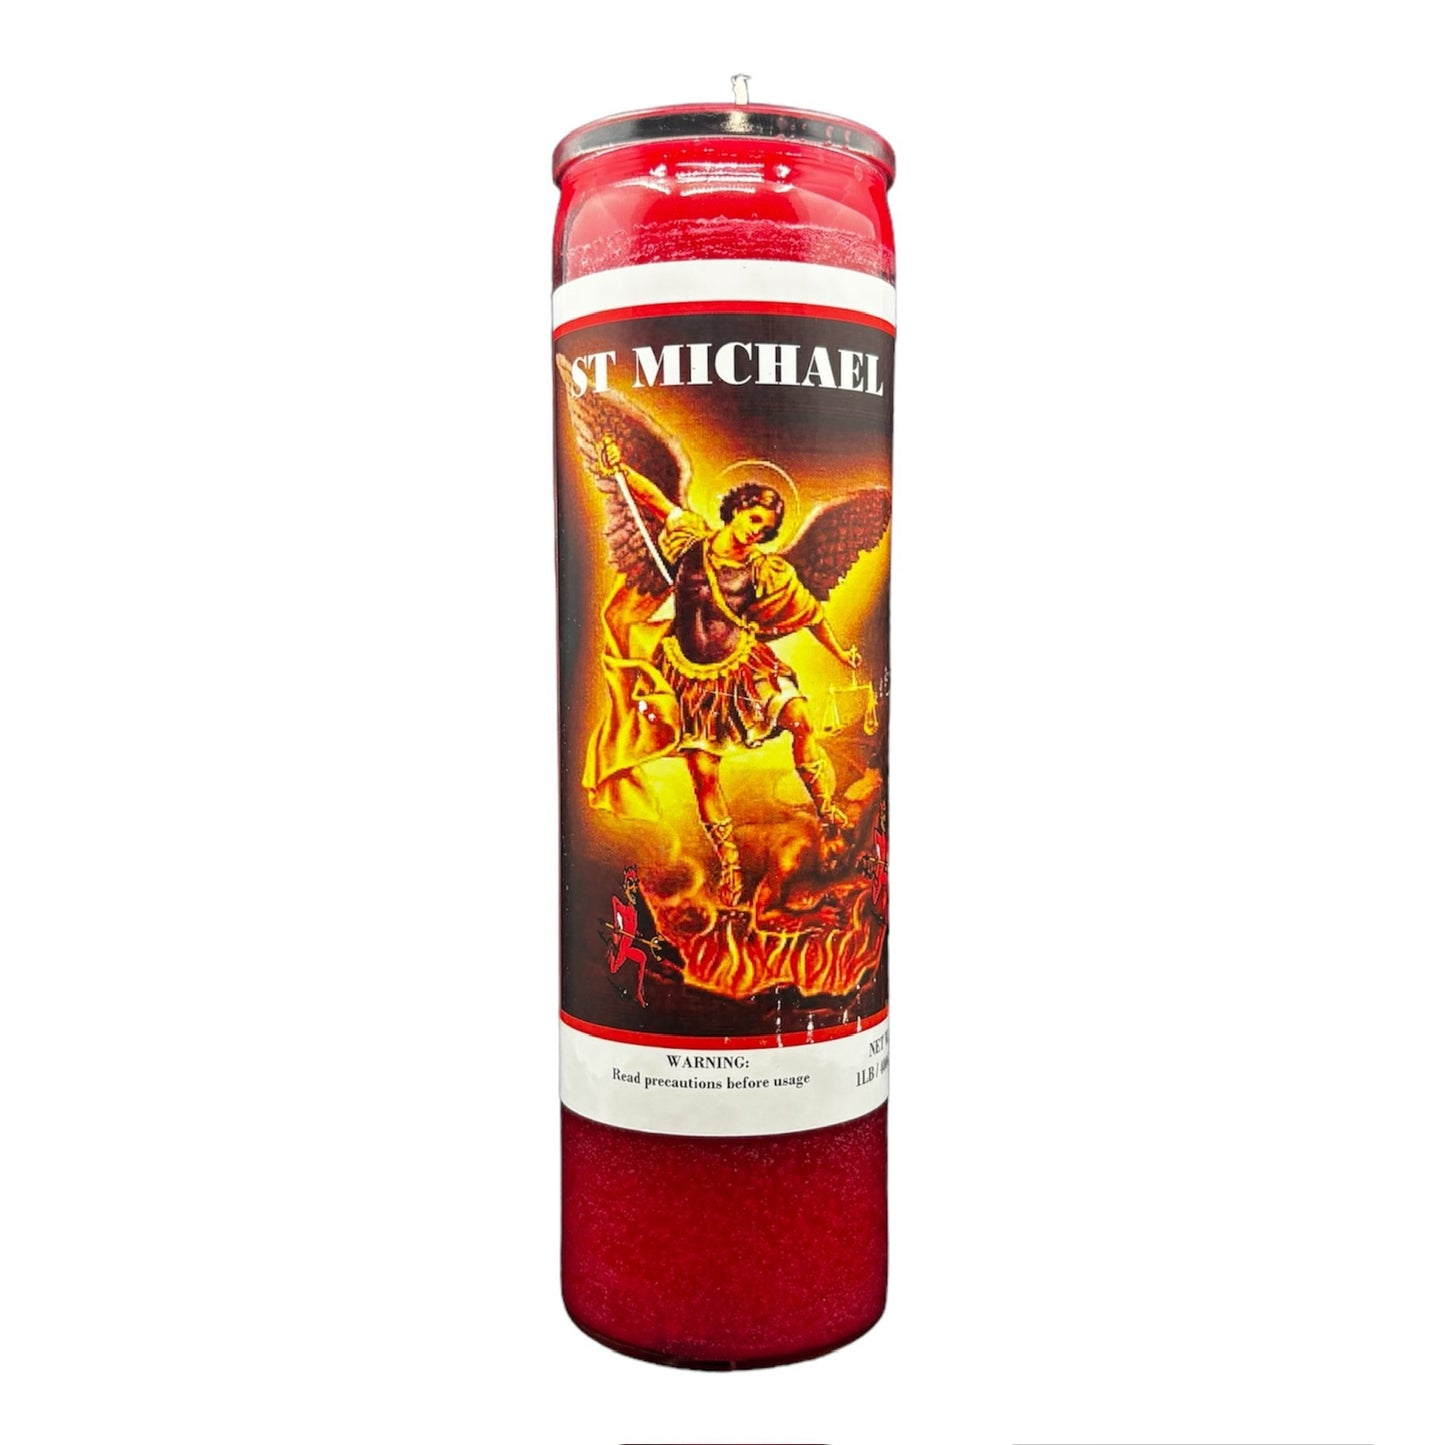 St. Michael Candle